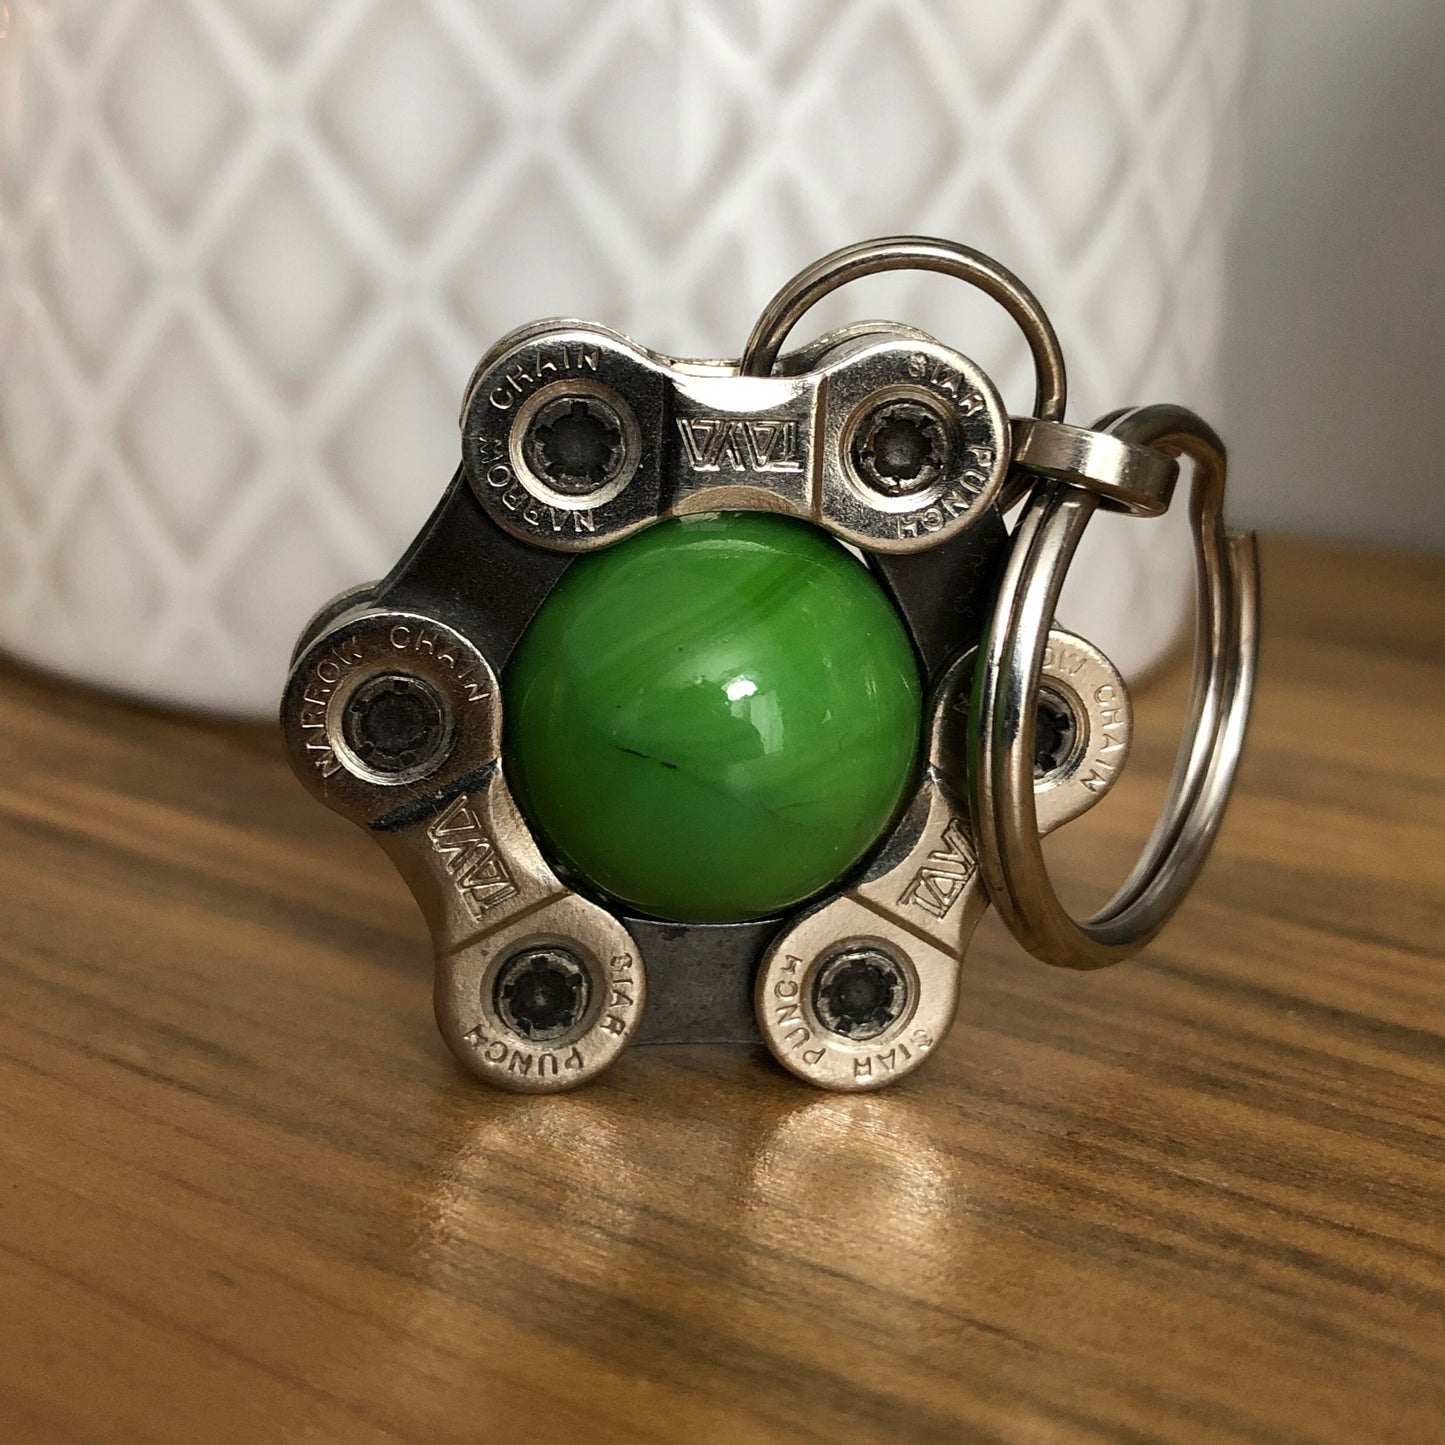 Recycled Bicycle Chain Key Chain: Chrysoprase with Silver Link